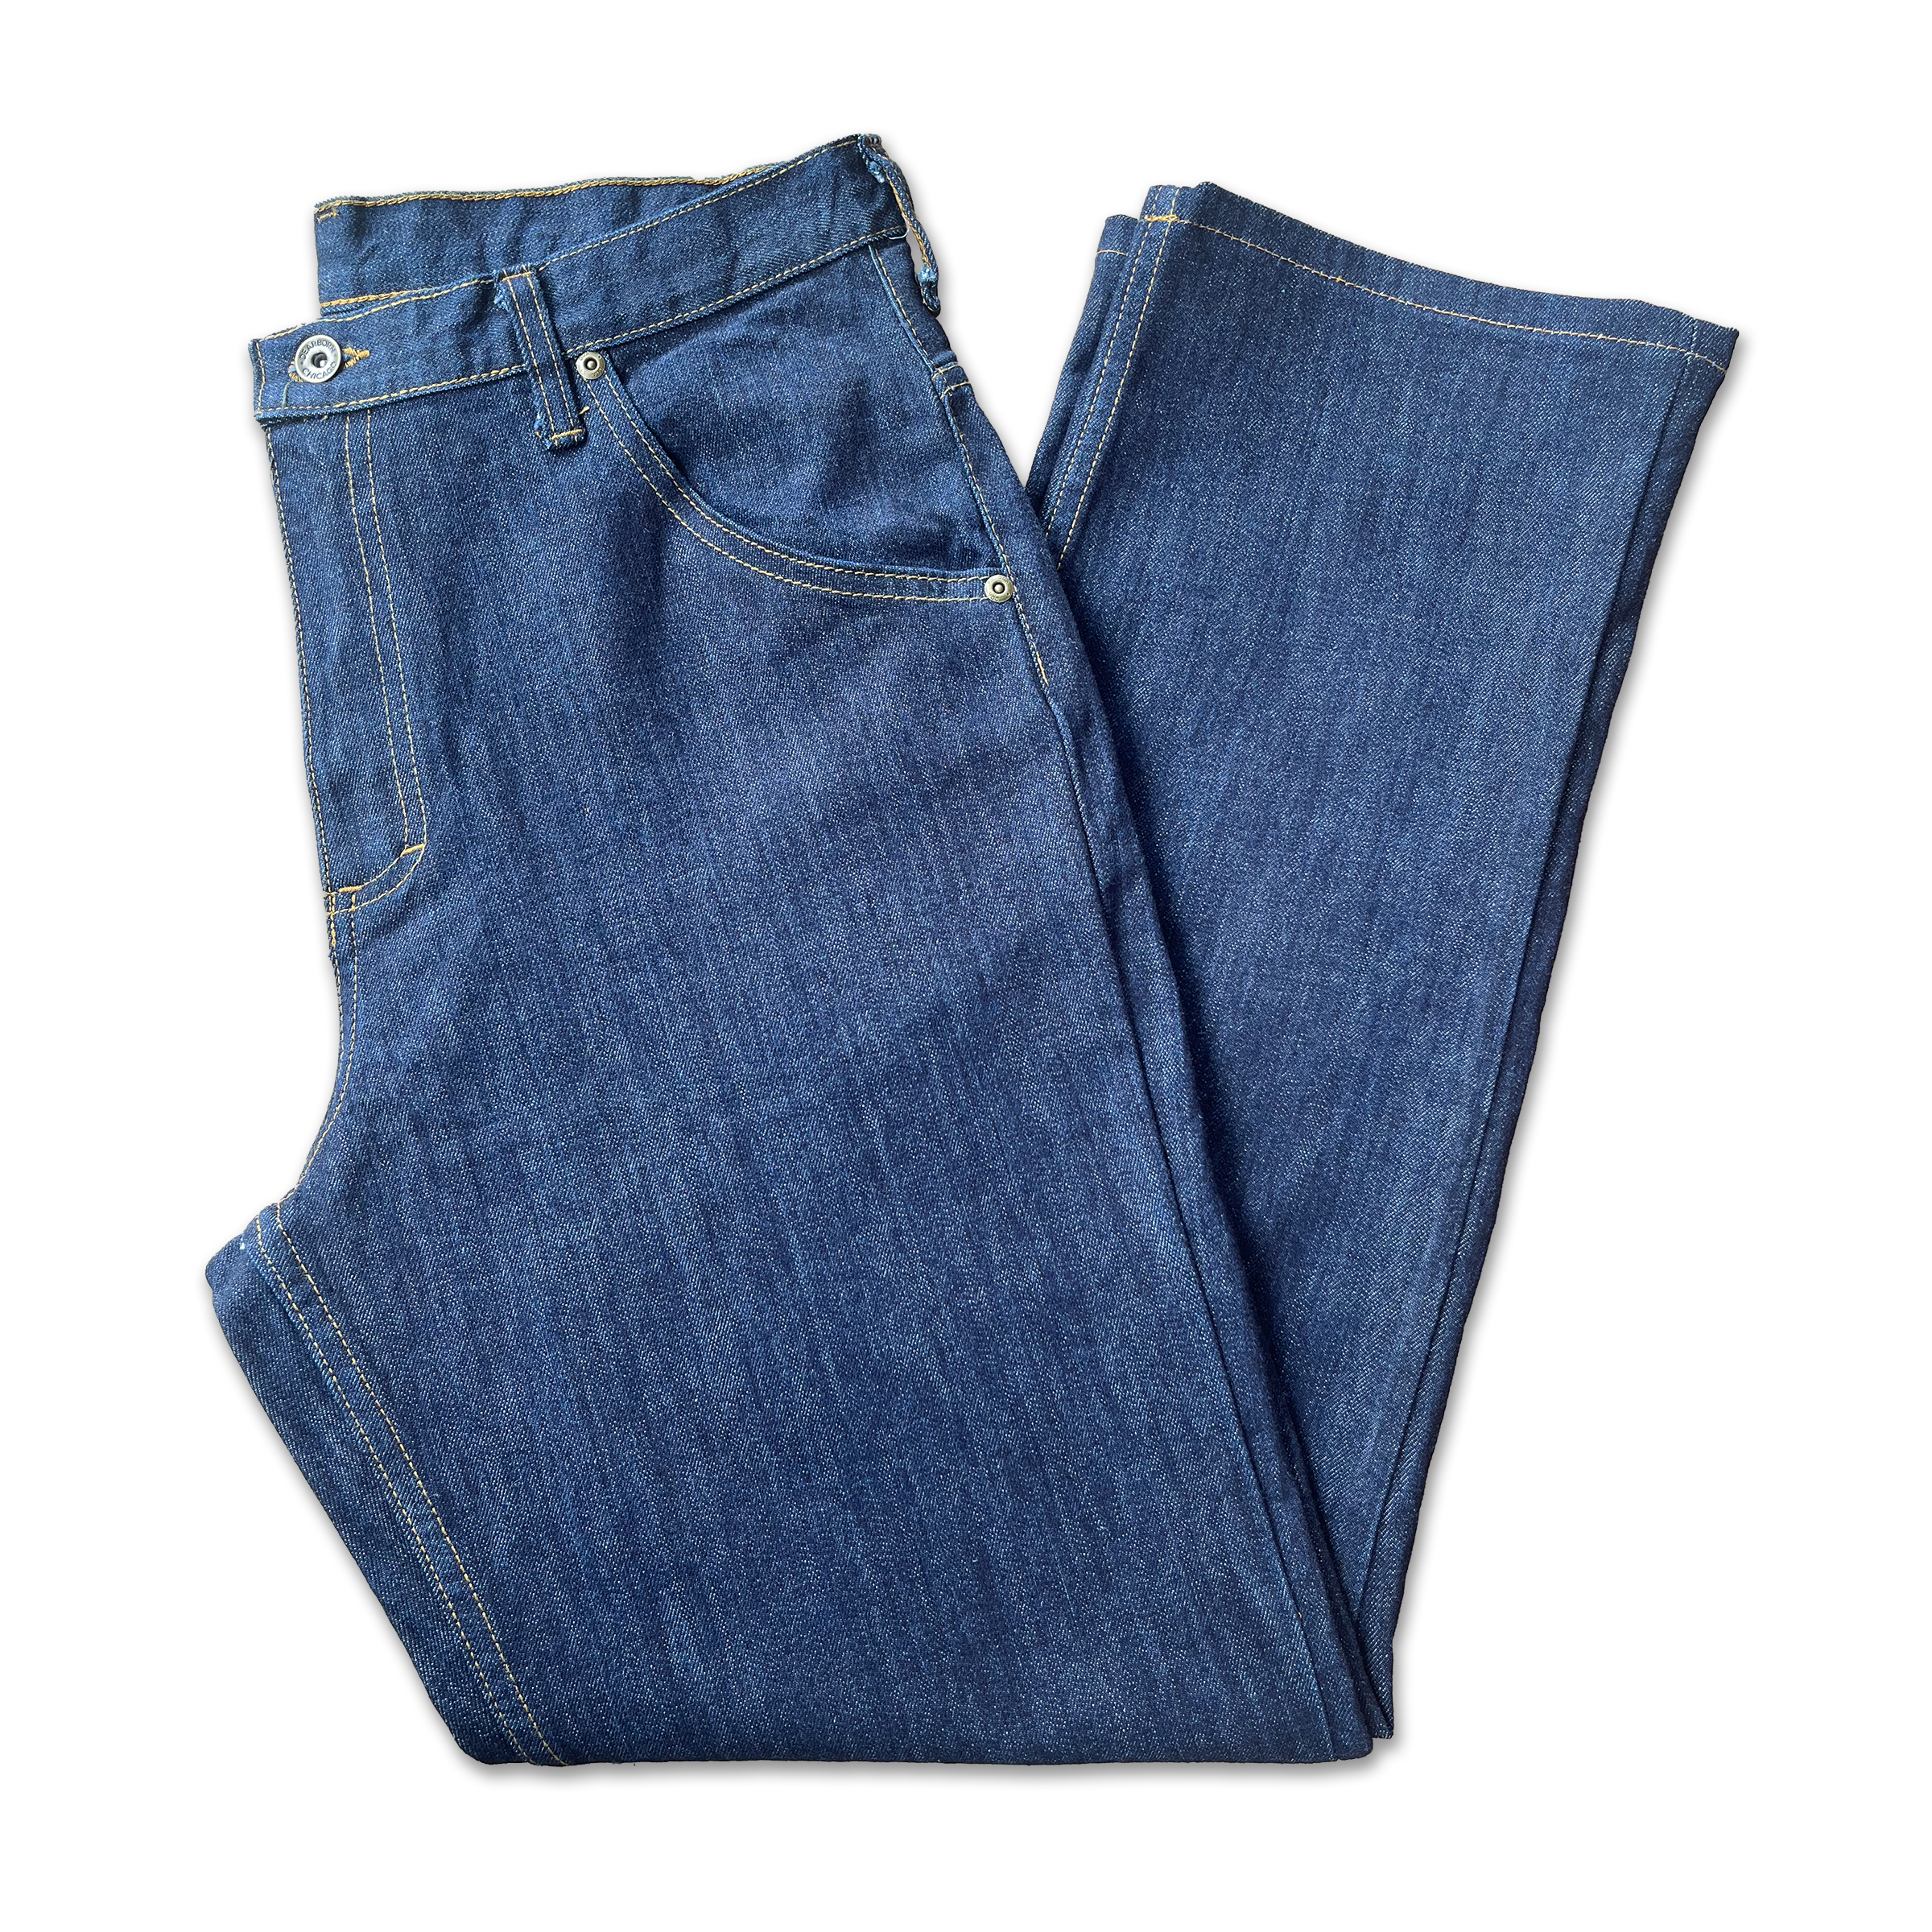 SPECIAL Relaxed Fit Dark Wash 11oz Comfort Stretch